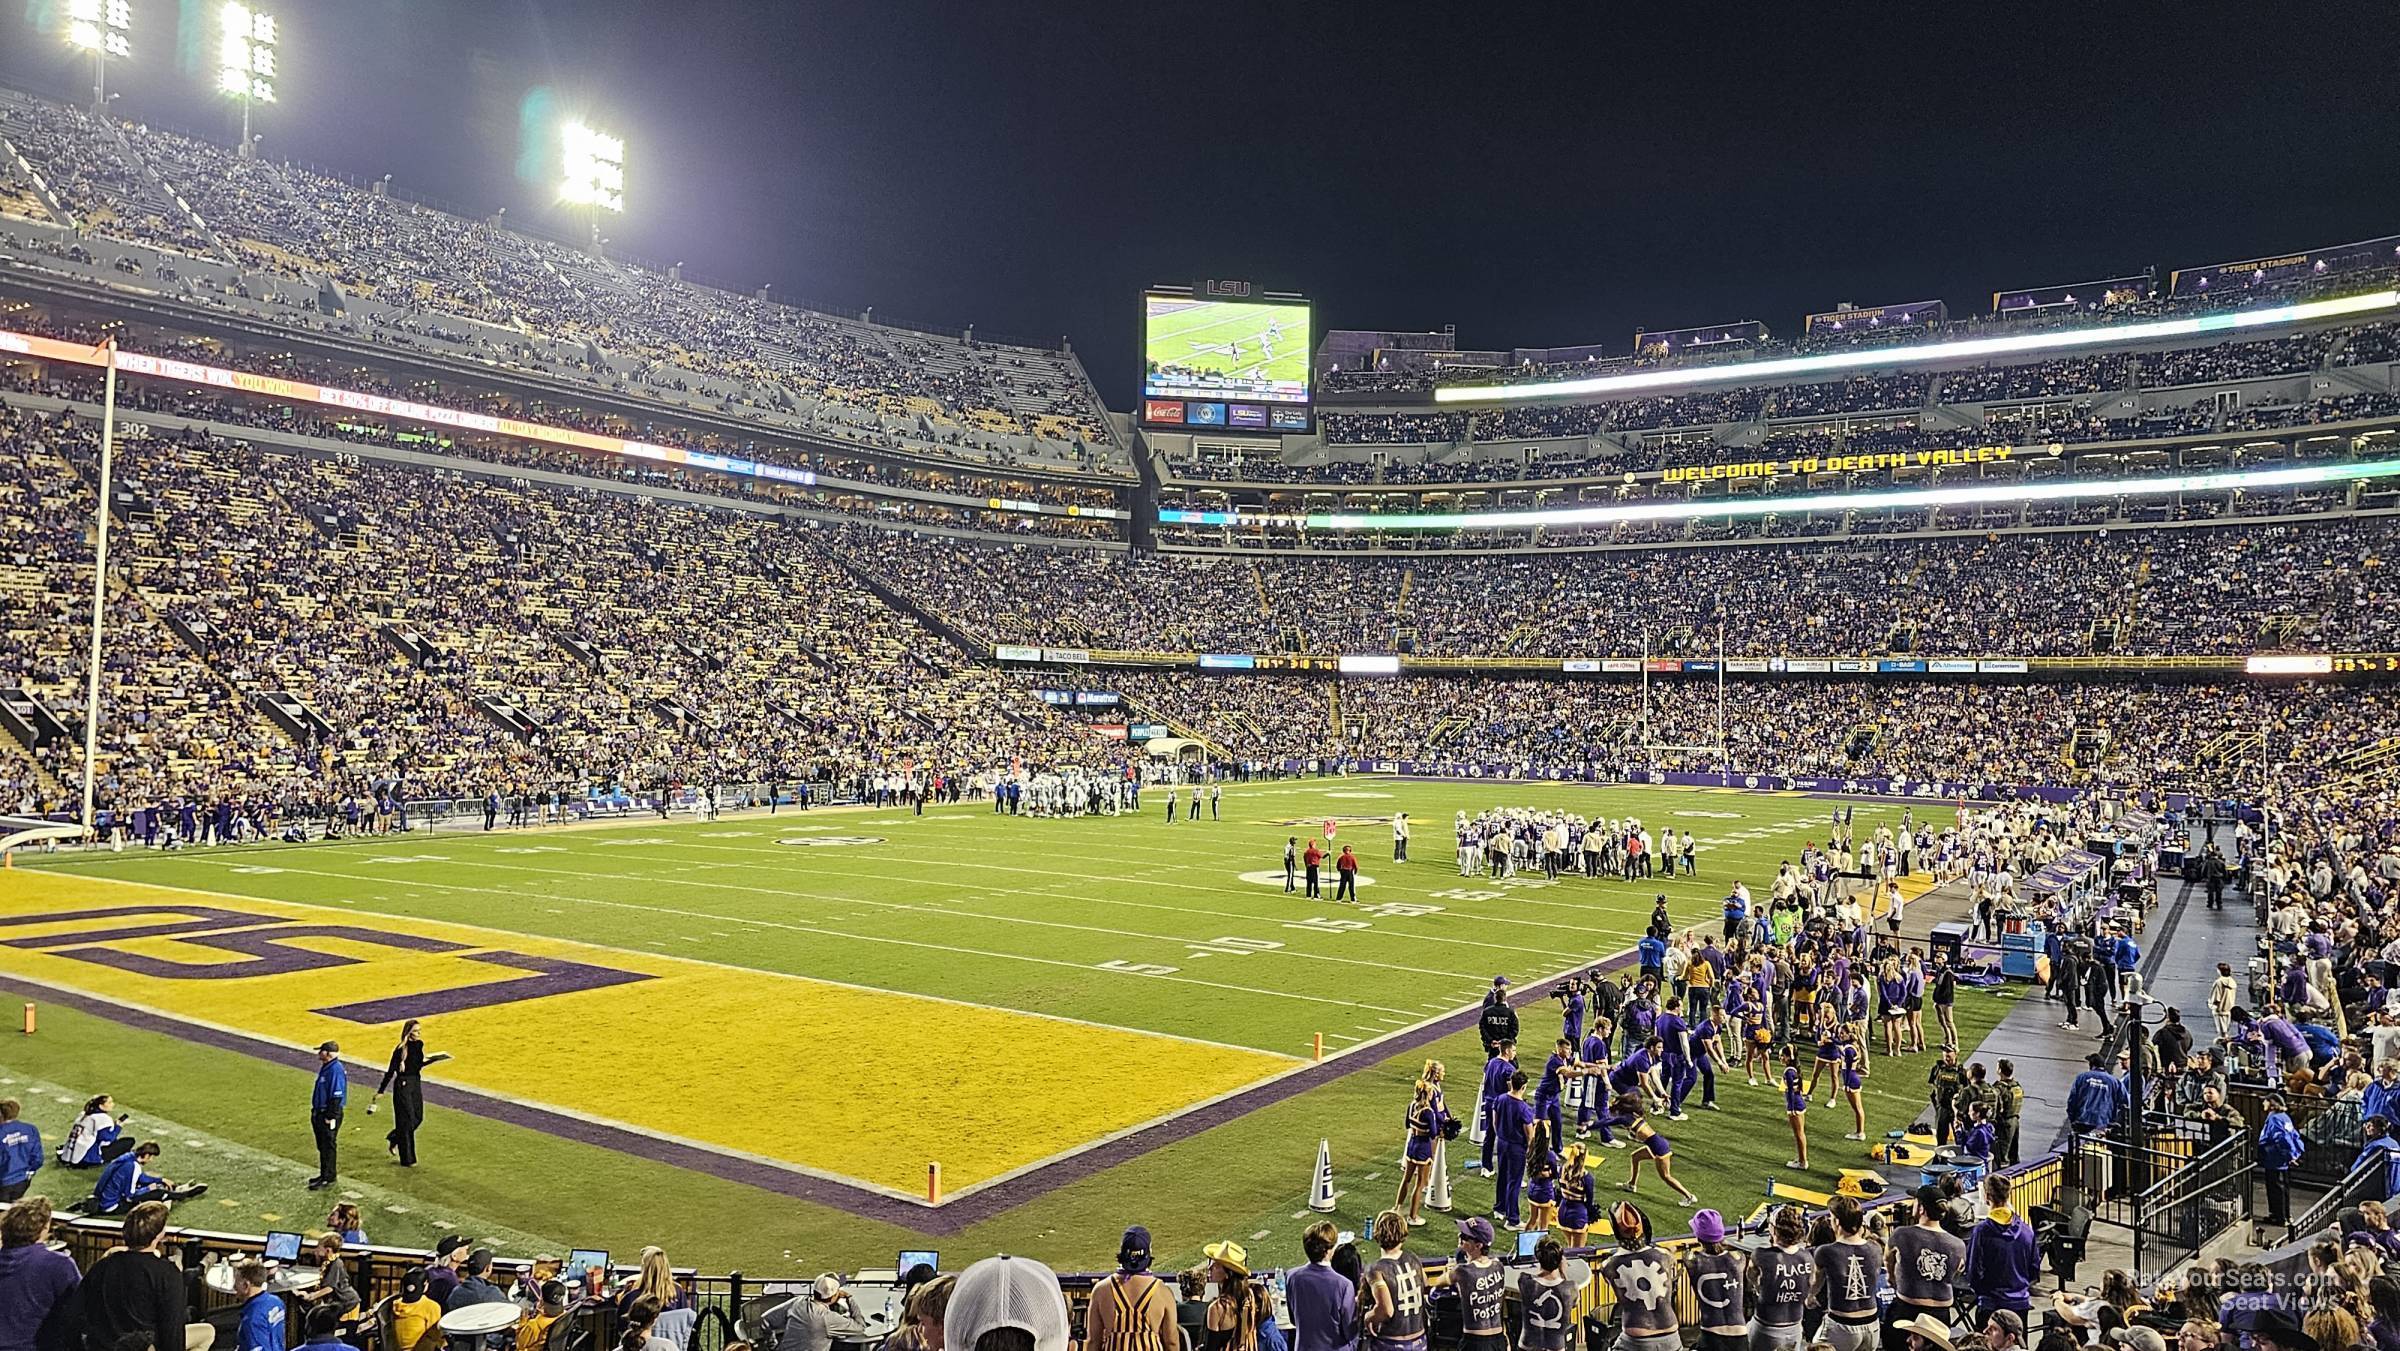 section 219, row 1 seat view  - tiger stadium